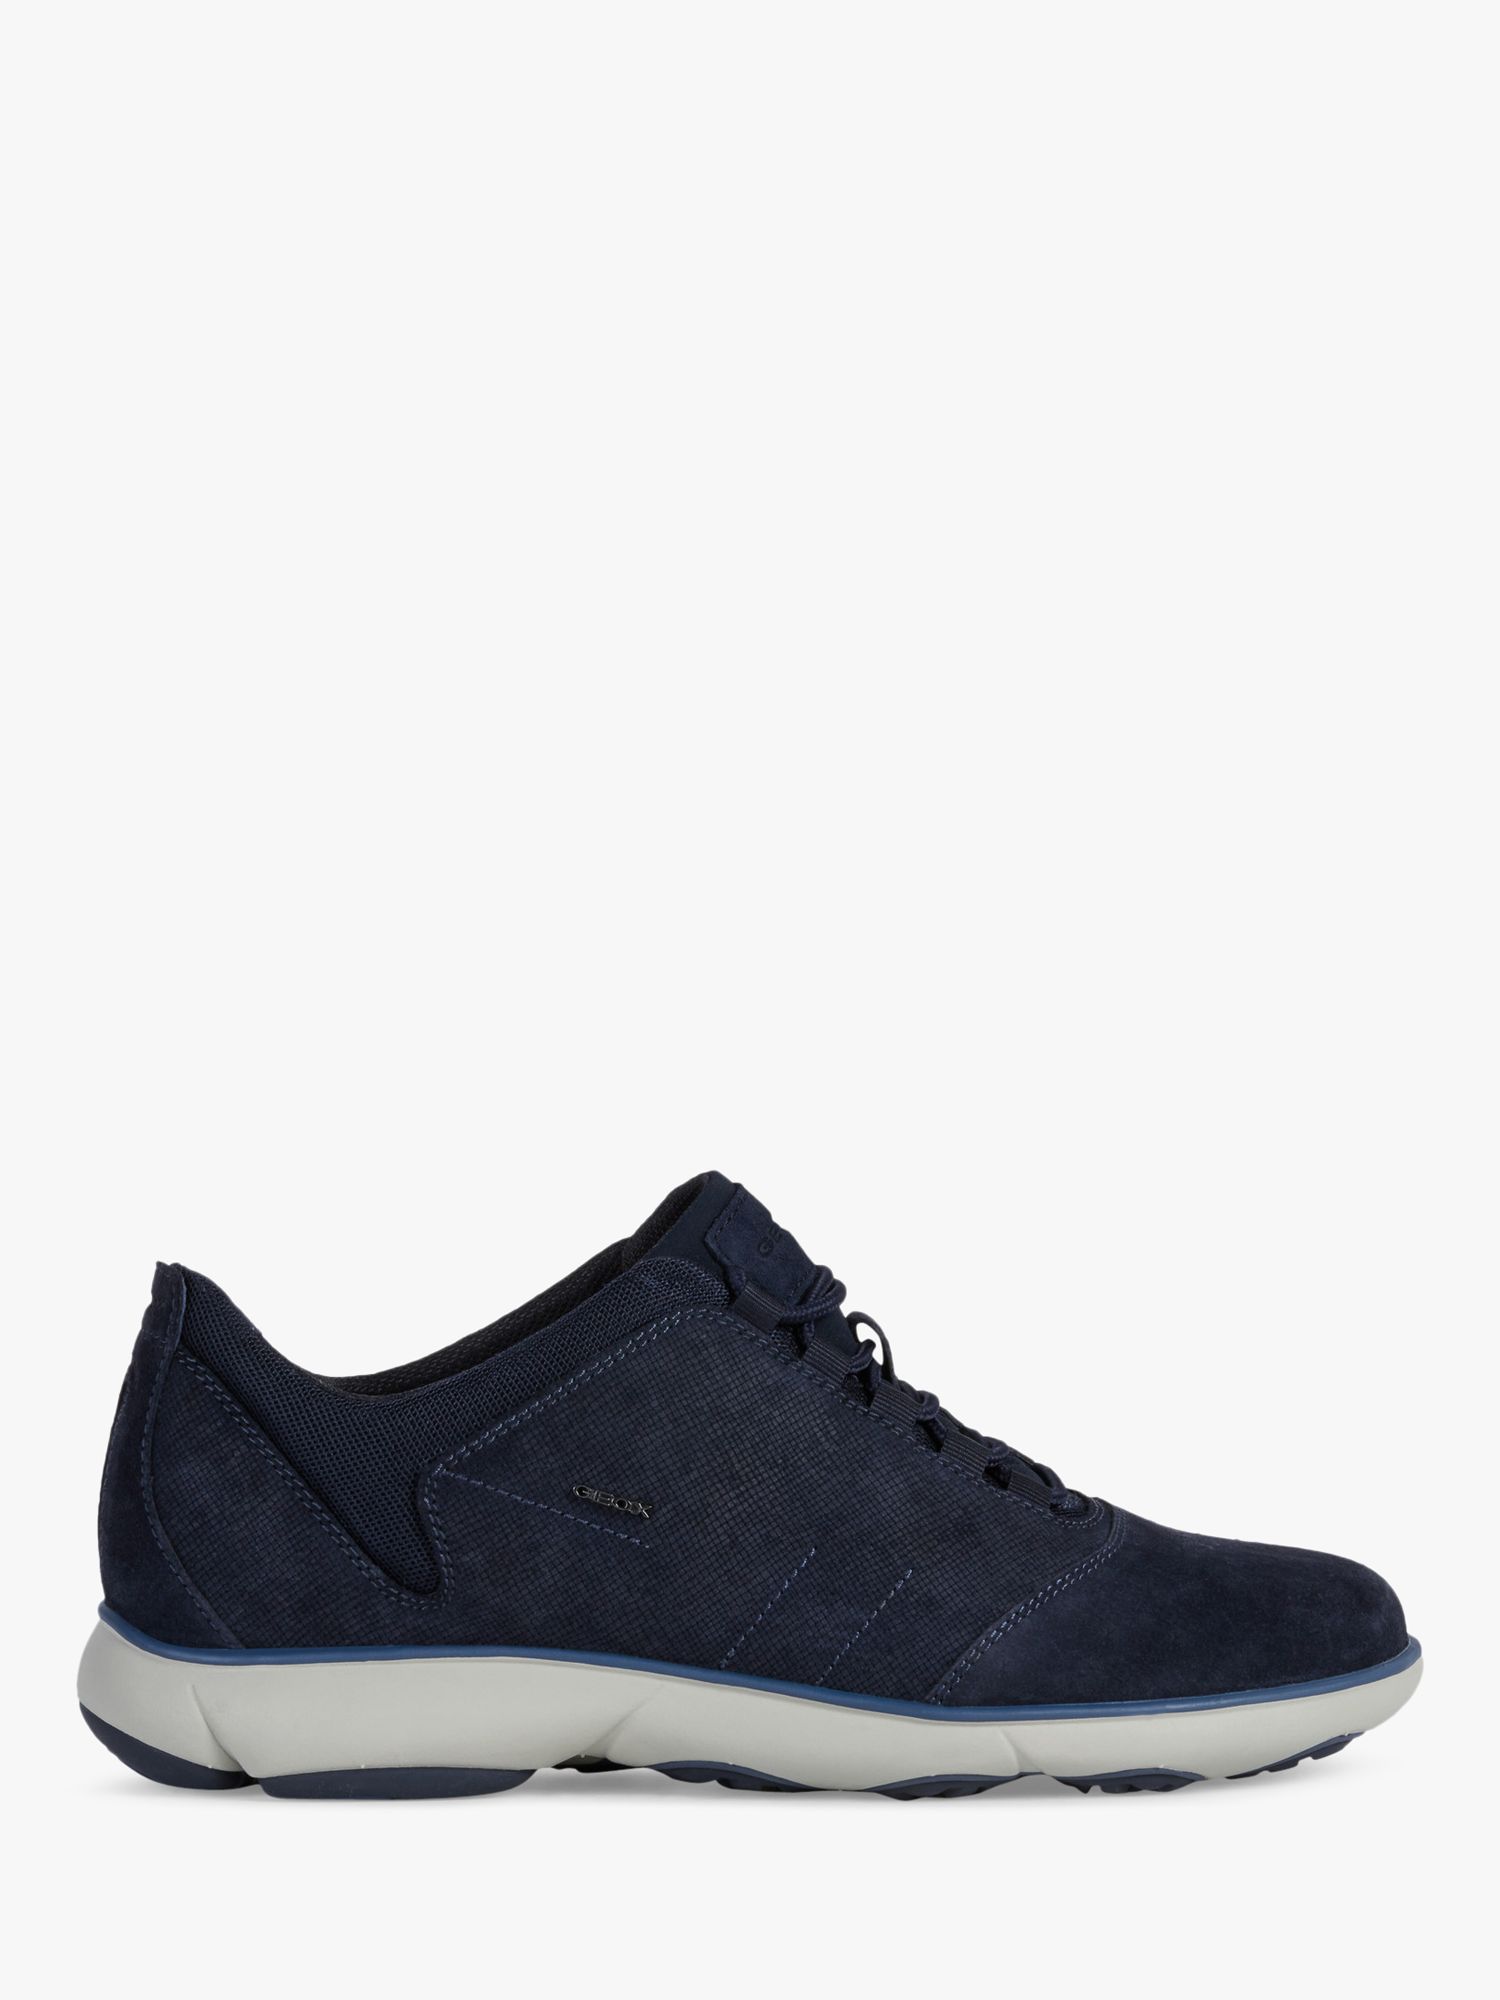 Geox Nebula Breathable Trainers, Navy at John Lewis & Partners